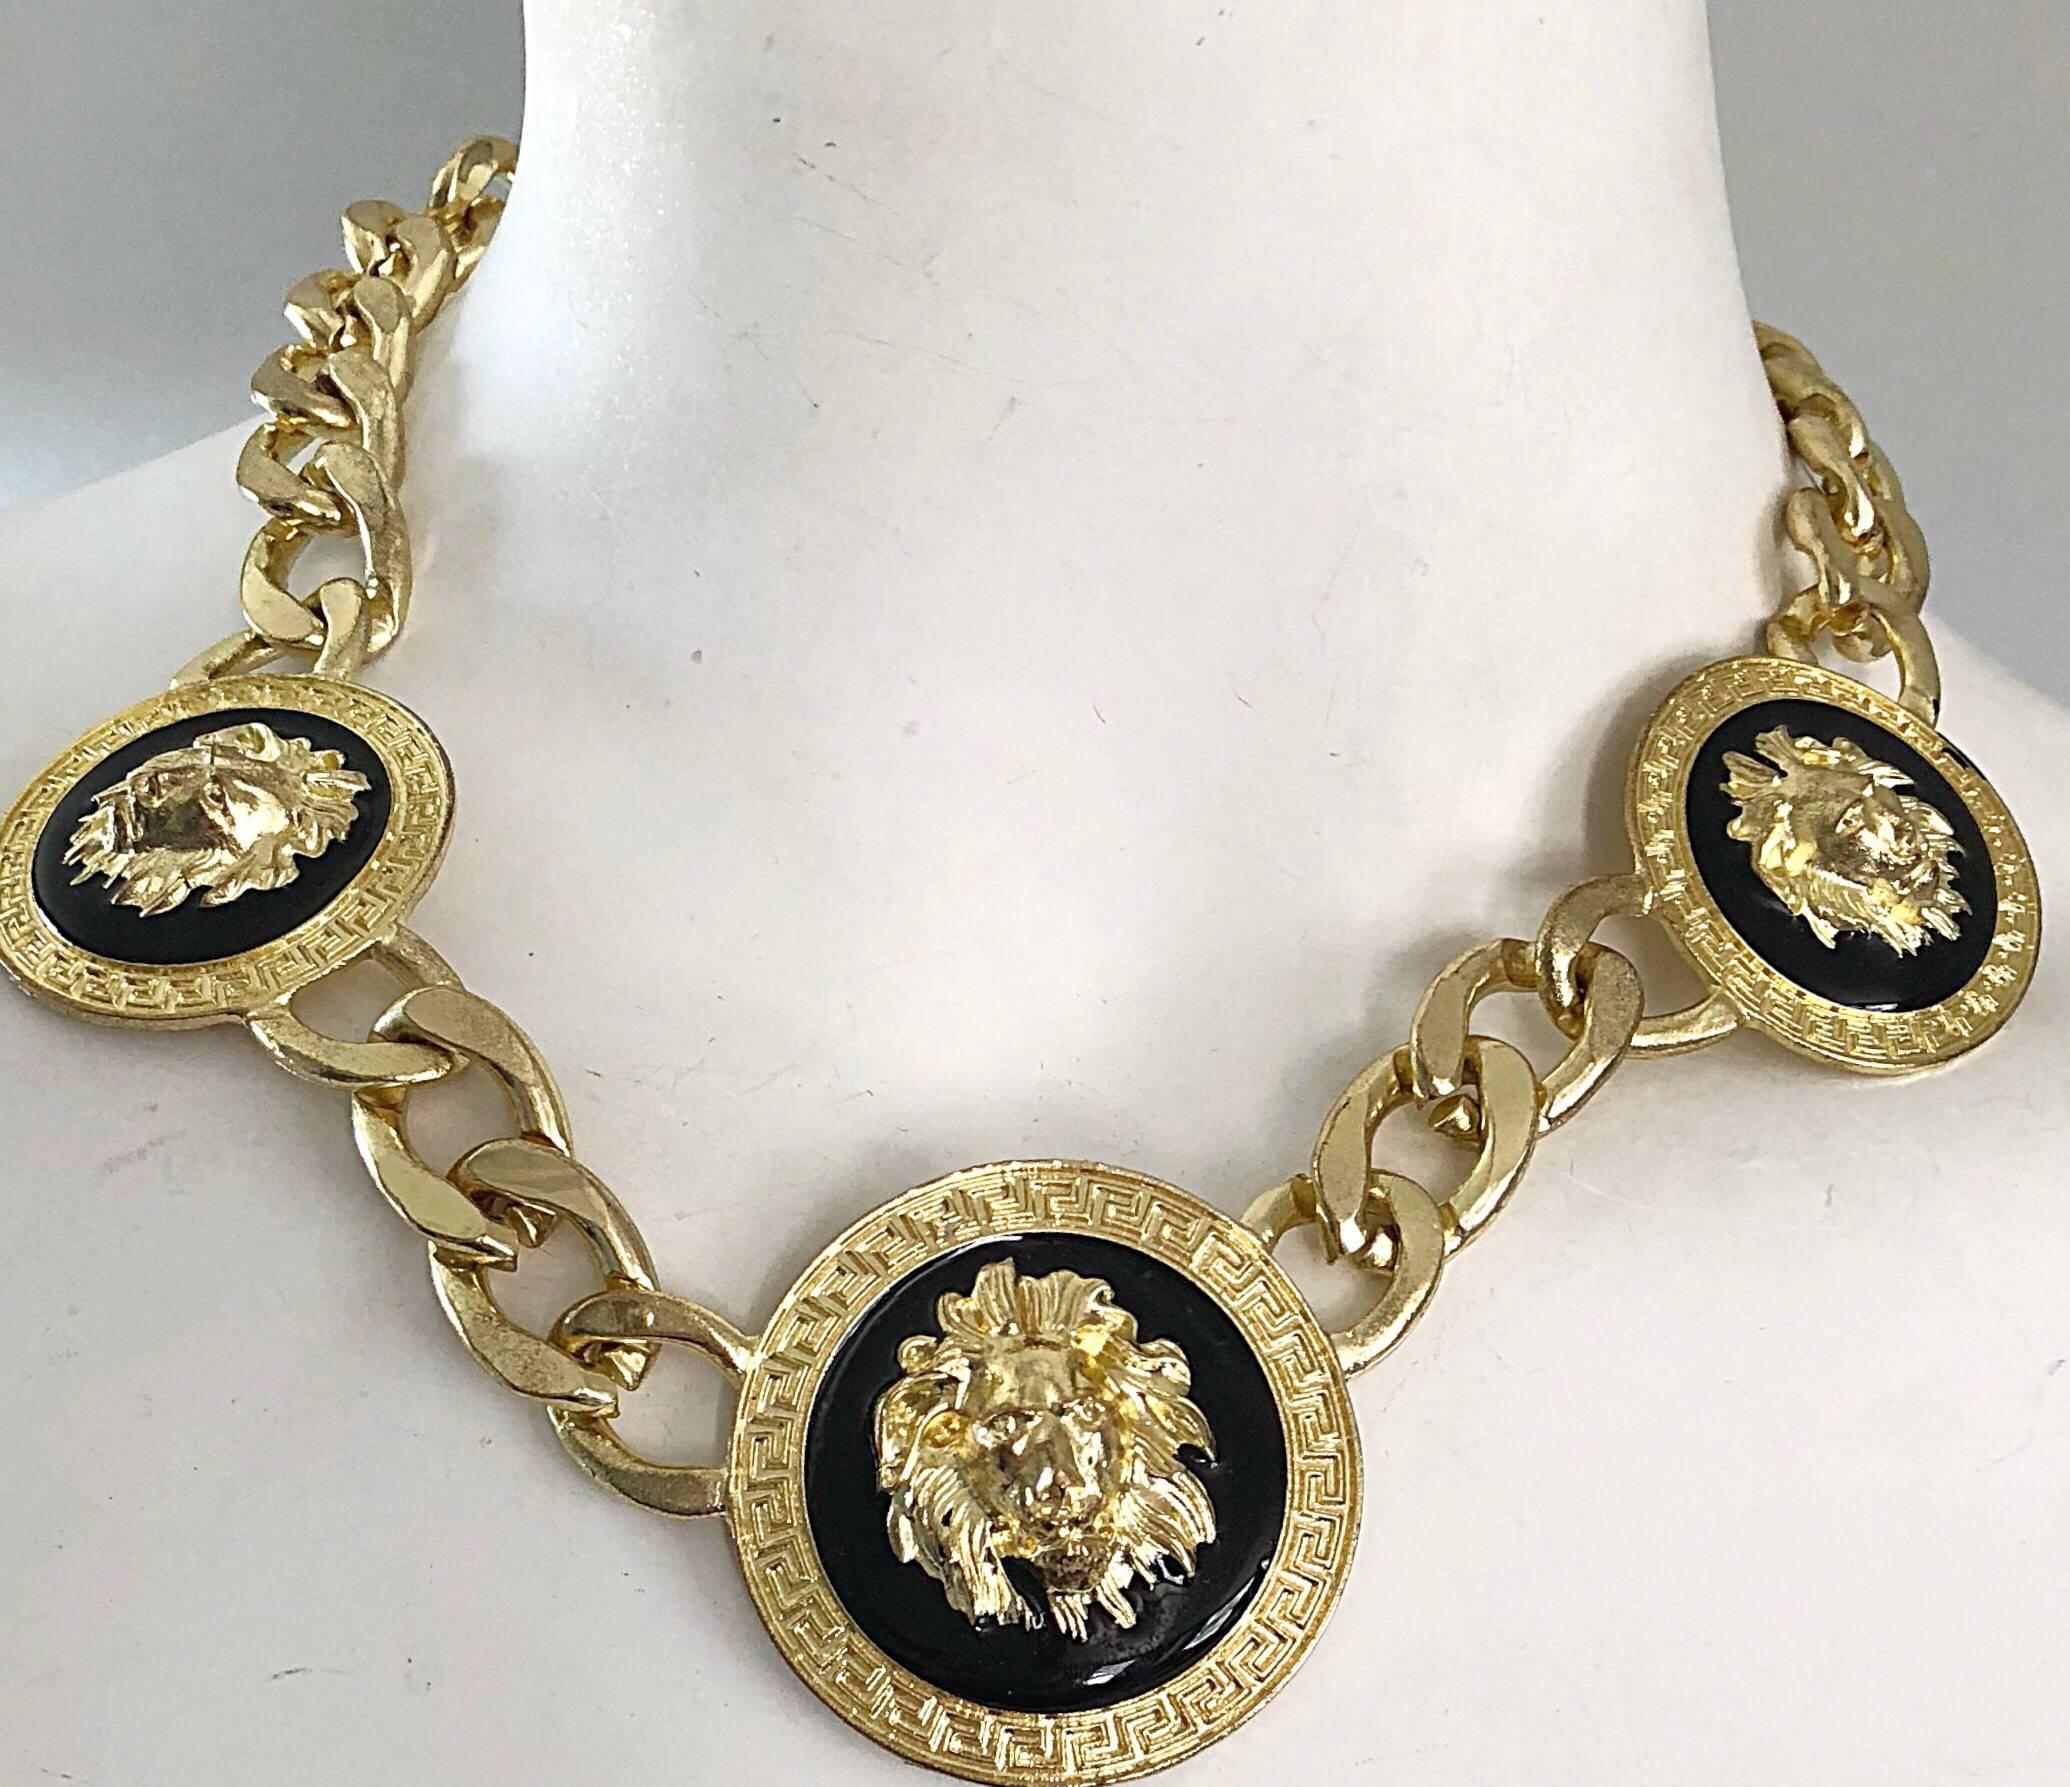 Amazing vintage 90s vintage GIANNI VERSACE style lion head Medusa style gold and black choker necklace! The necklace to complete any outfit! Adjustable length, and be worn day or evening, In great condition. Unsigned, and very well made.